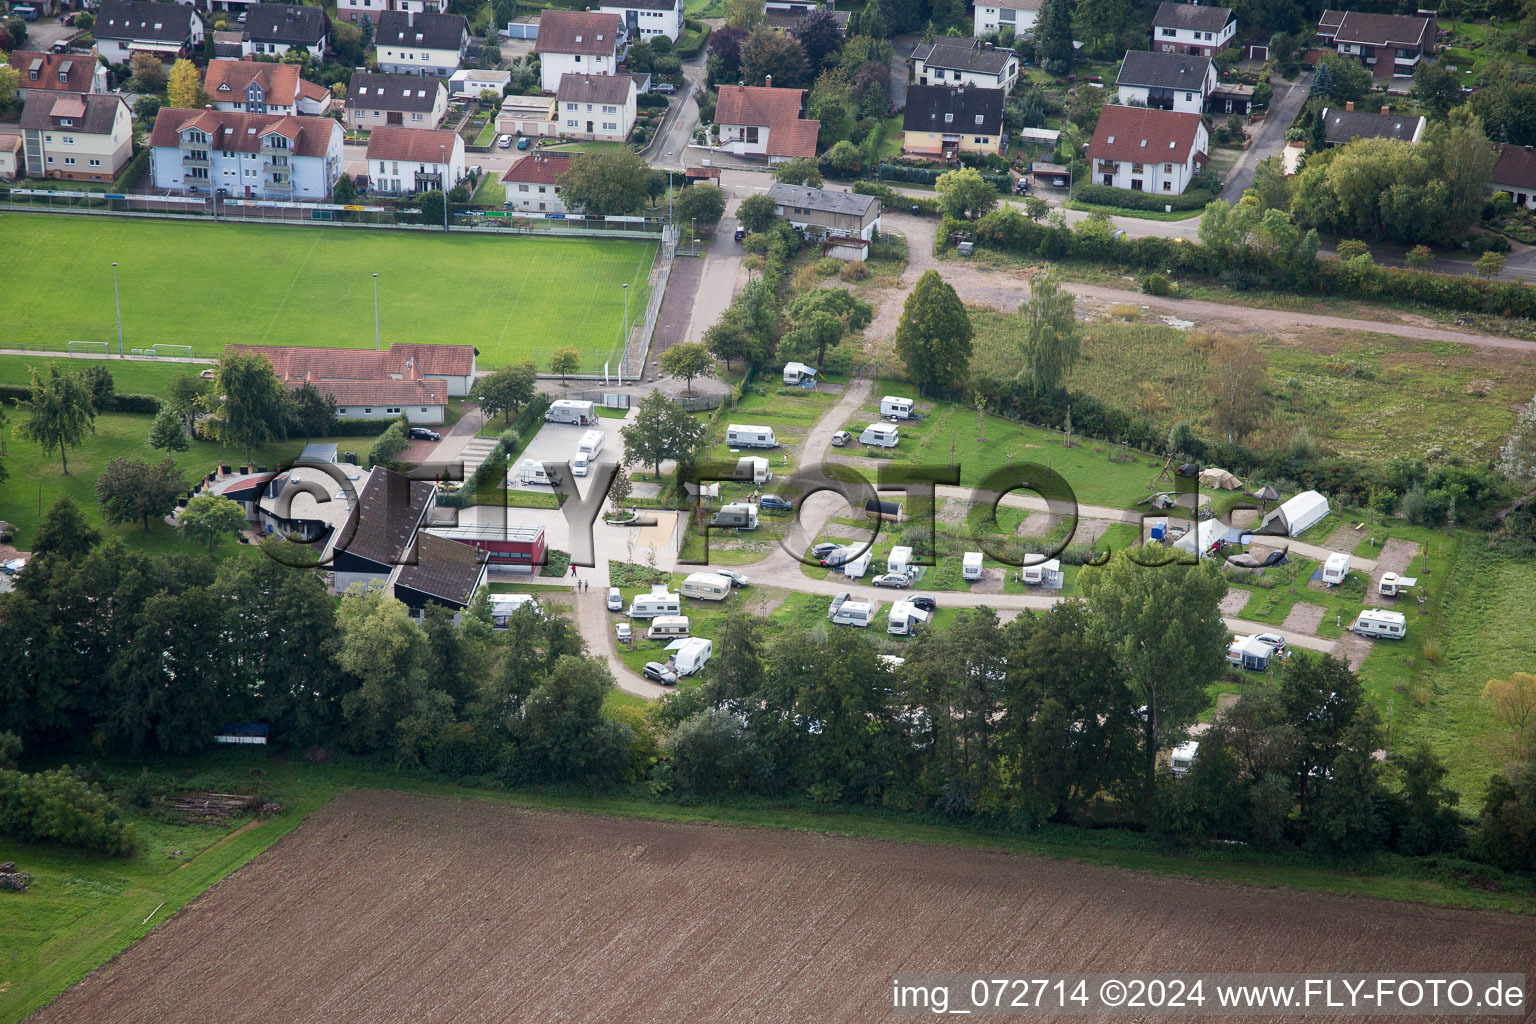 Camping with caravans and tents in the district Ingenheim in Billigheim-Ingenheim in the state Rhineland-Palatinate